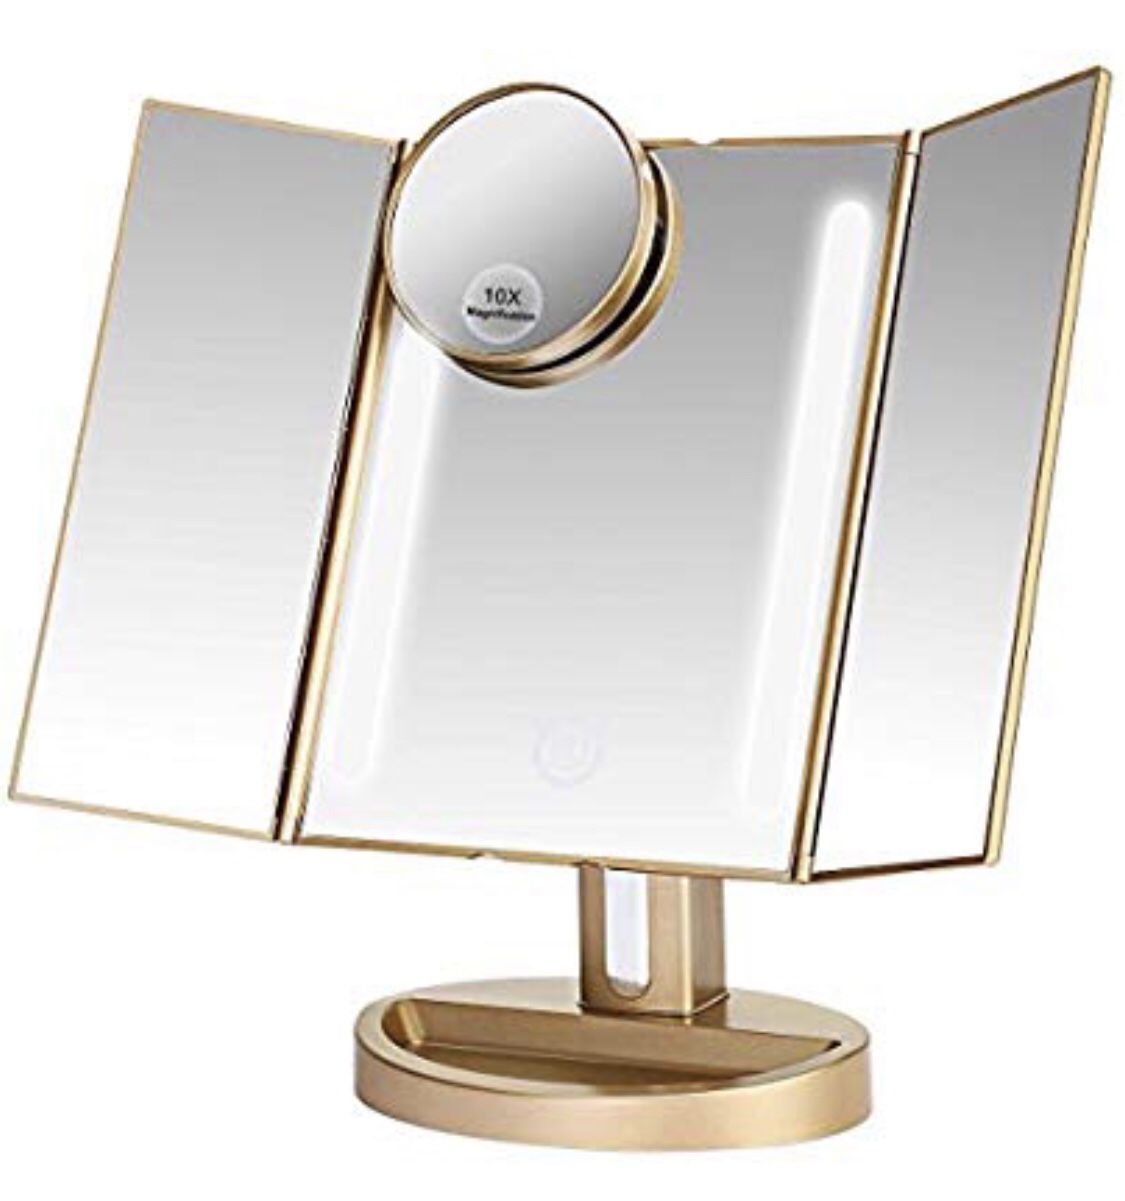 Brand New In Box Makeup Mirror/Natural Daylight Lighted Vanity Mirror with Touch Screen Dimming, Detachable 10X Magnification Spot Mirror, Two Power